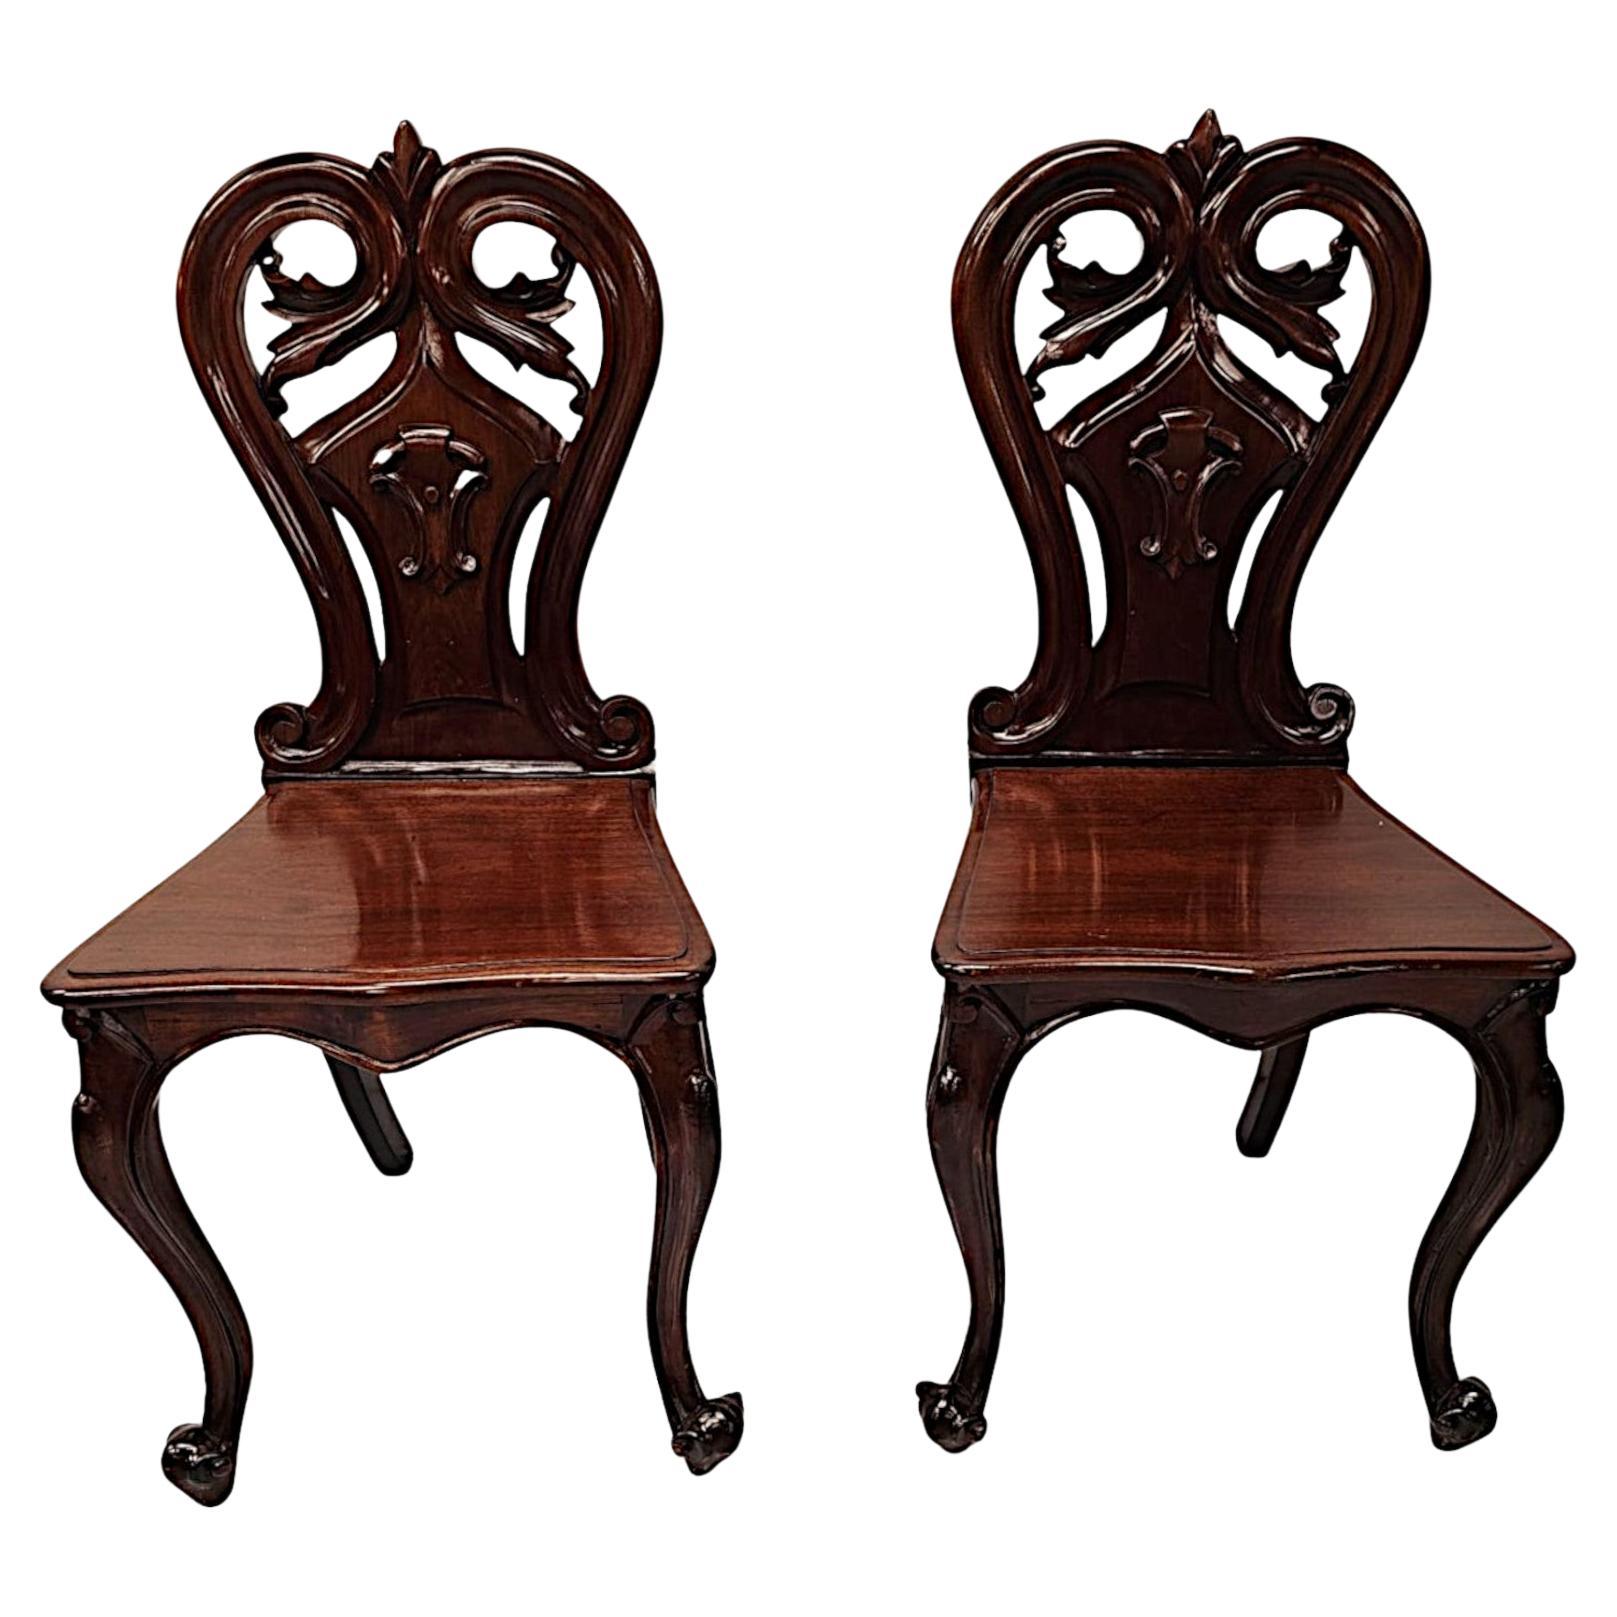 A Stunning Pair of 19th Century Hall Chairs For Sale